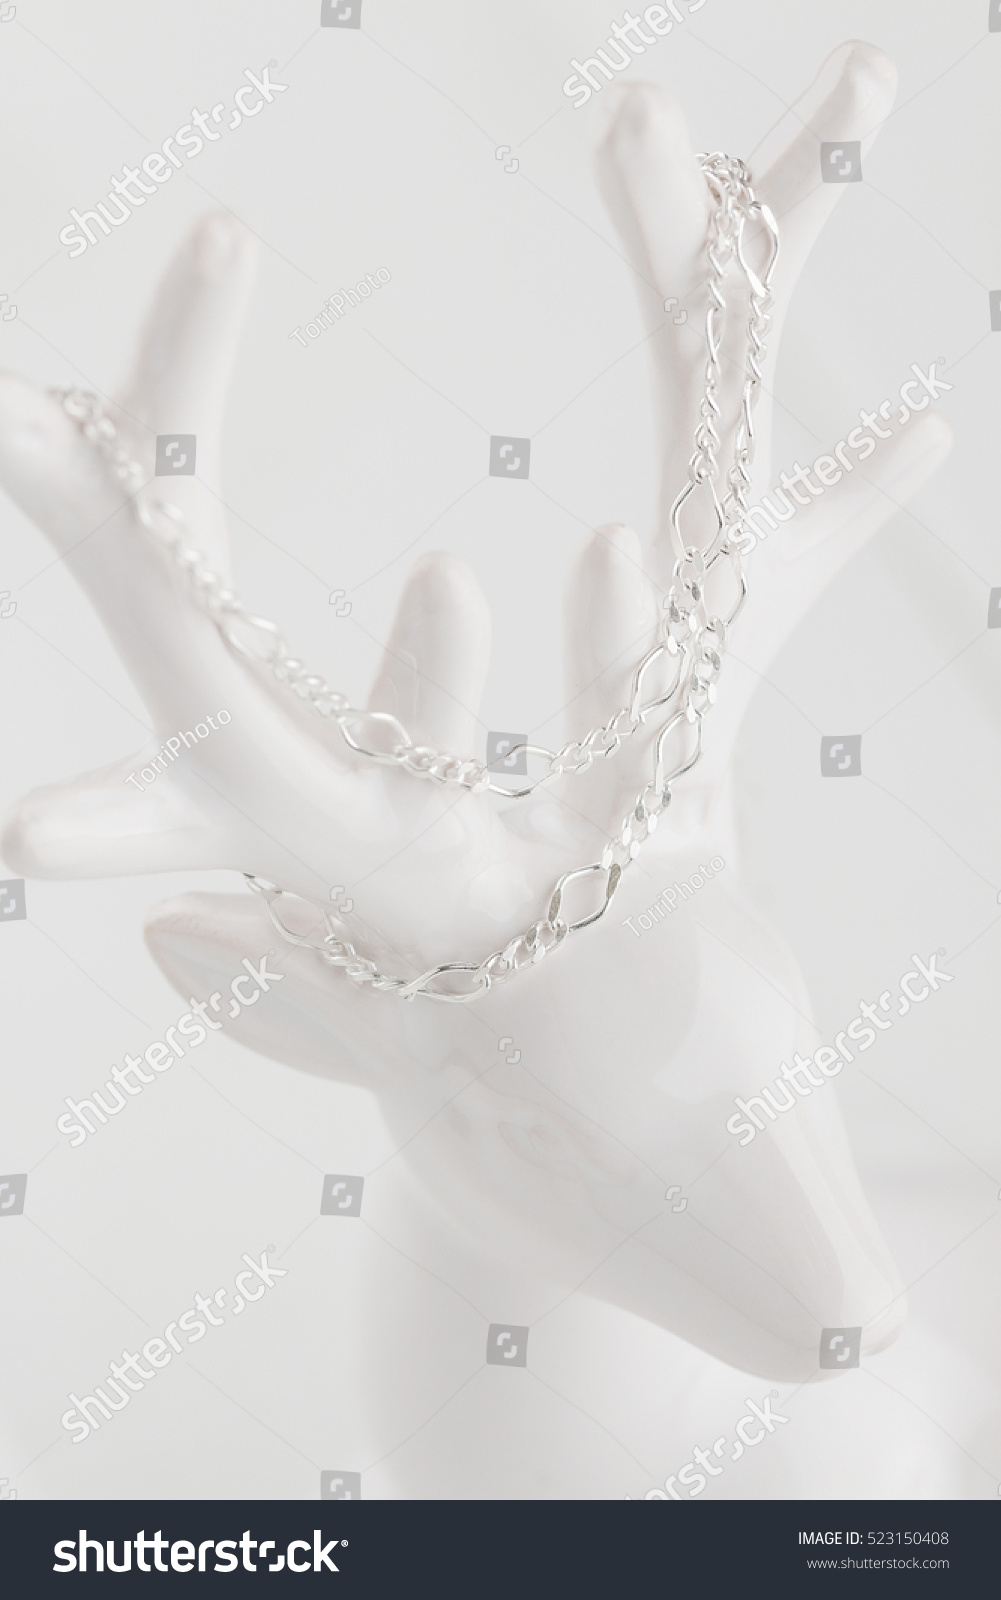 https://www.shutterstock.com/pic-523150408/stock-photo-sterling-silver-chain-on-white-jewelry-holder-still-life.html